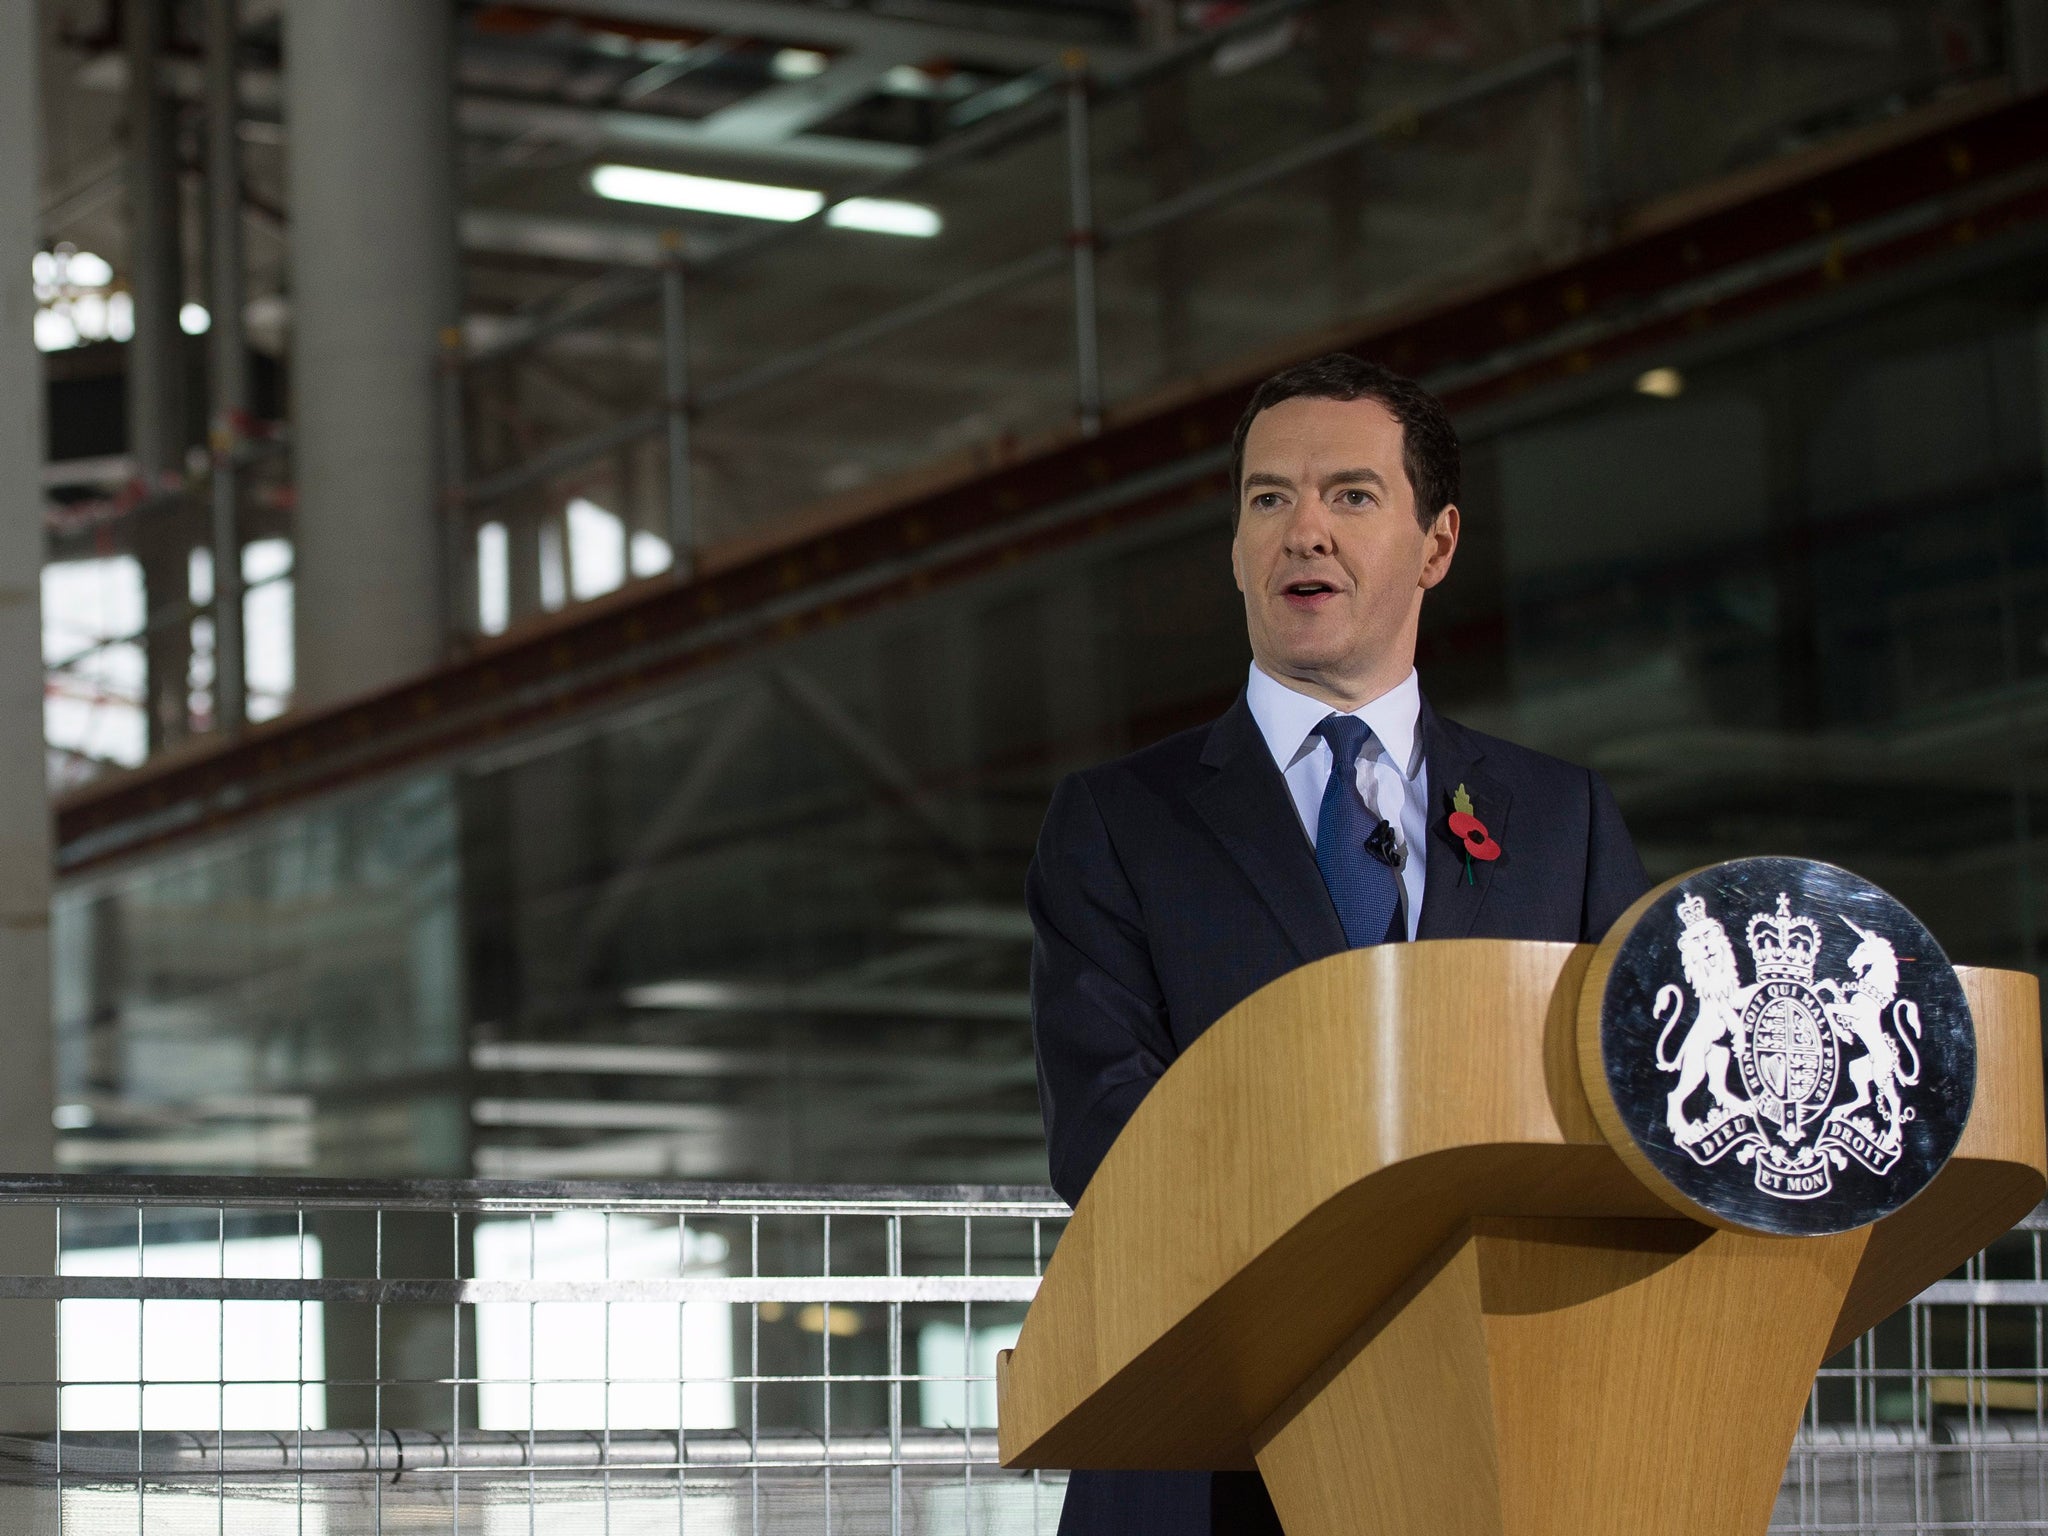 George Osborne said the large salaries showed the scope that remains for savings